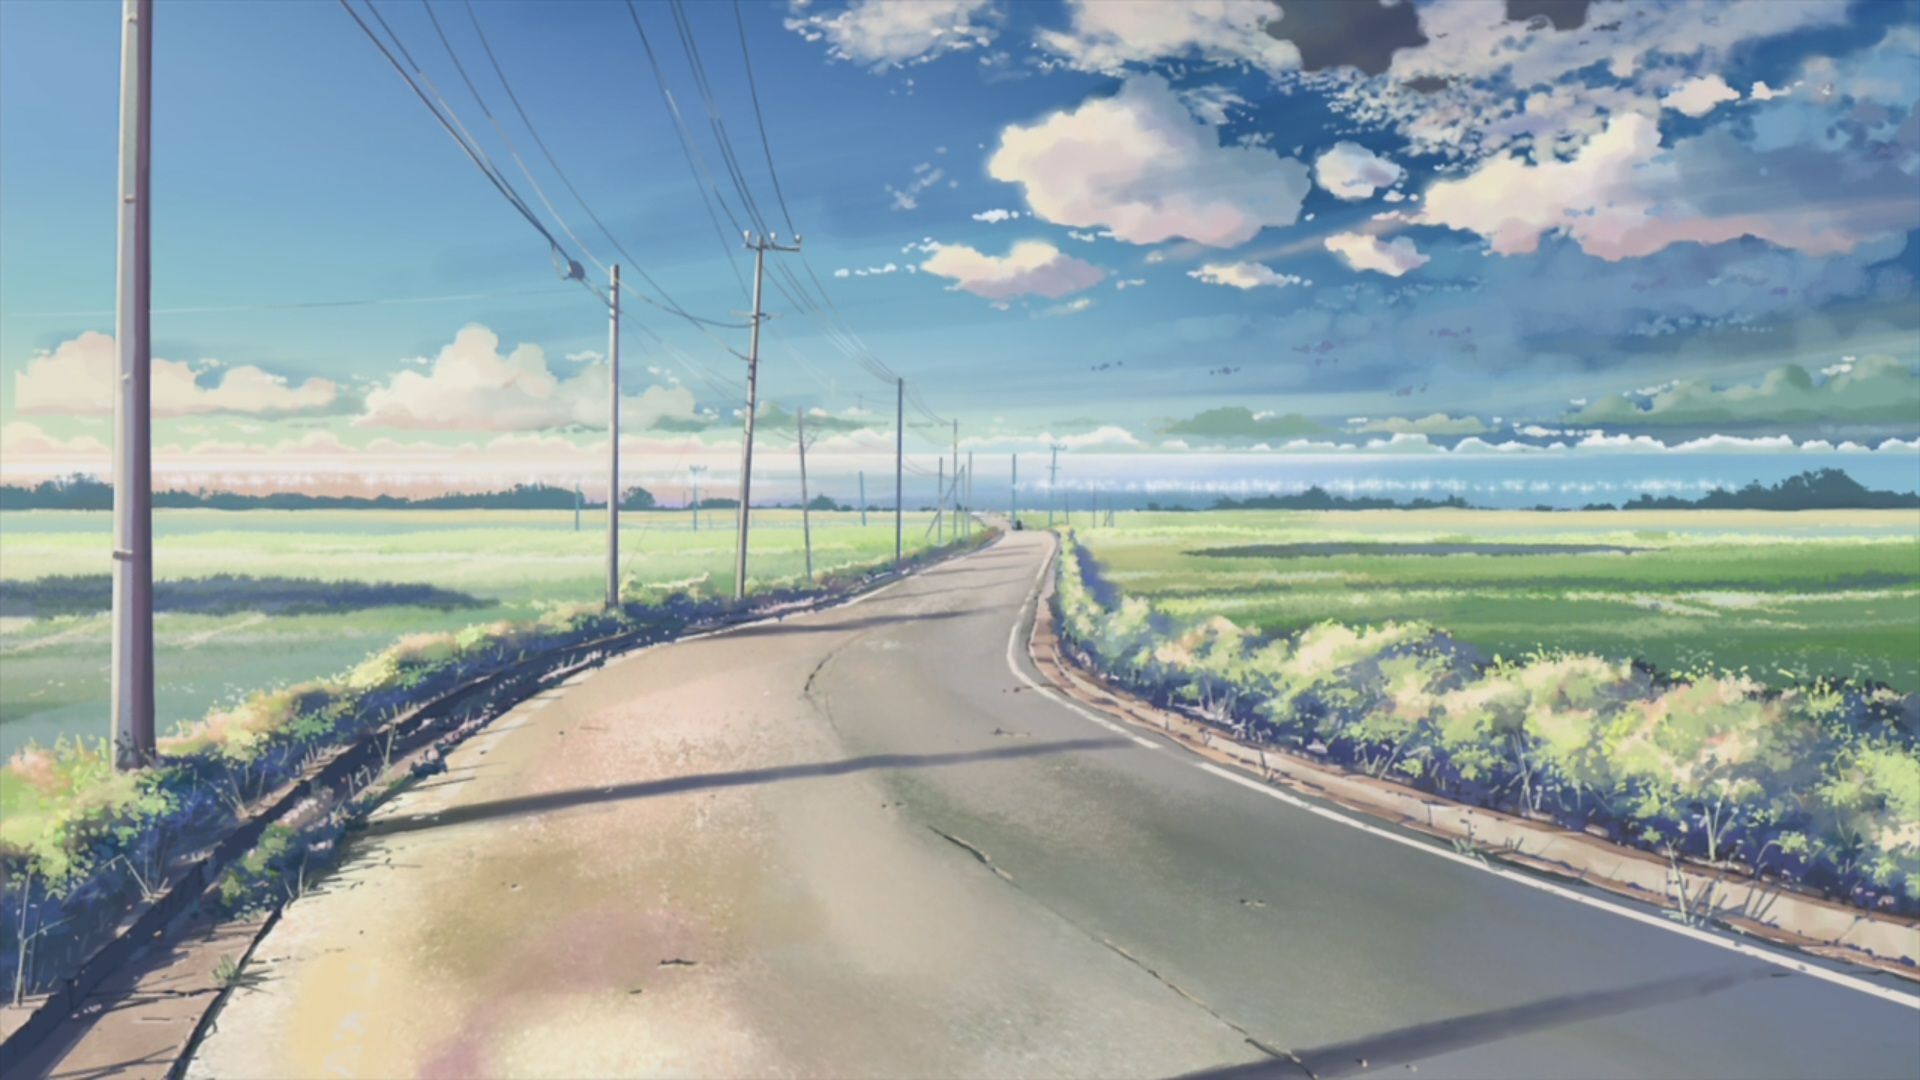 Anime Scenery HD Wallpaper and Background. Scenery wallpaper